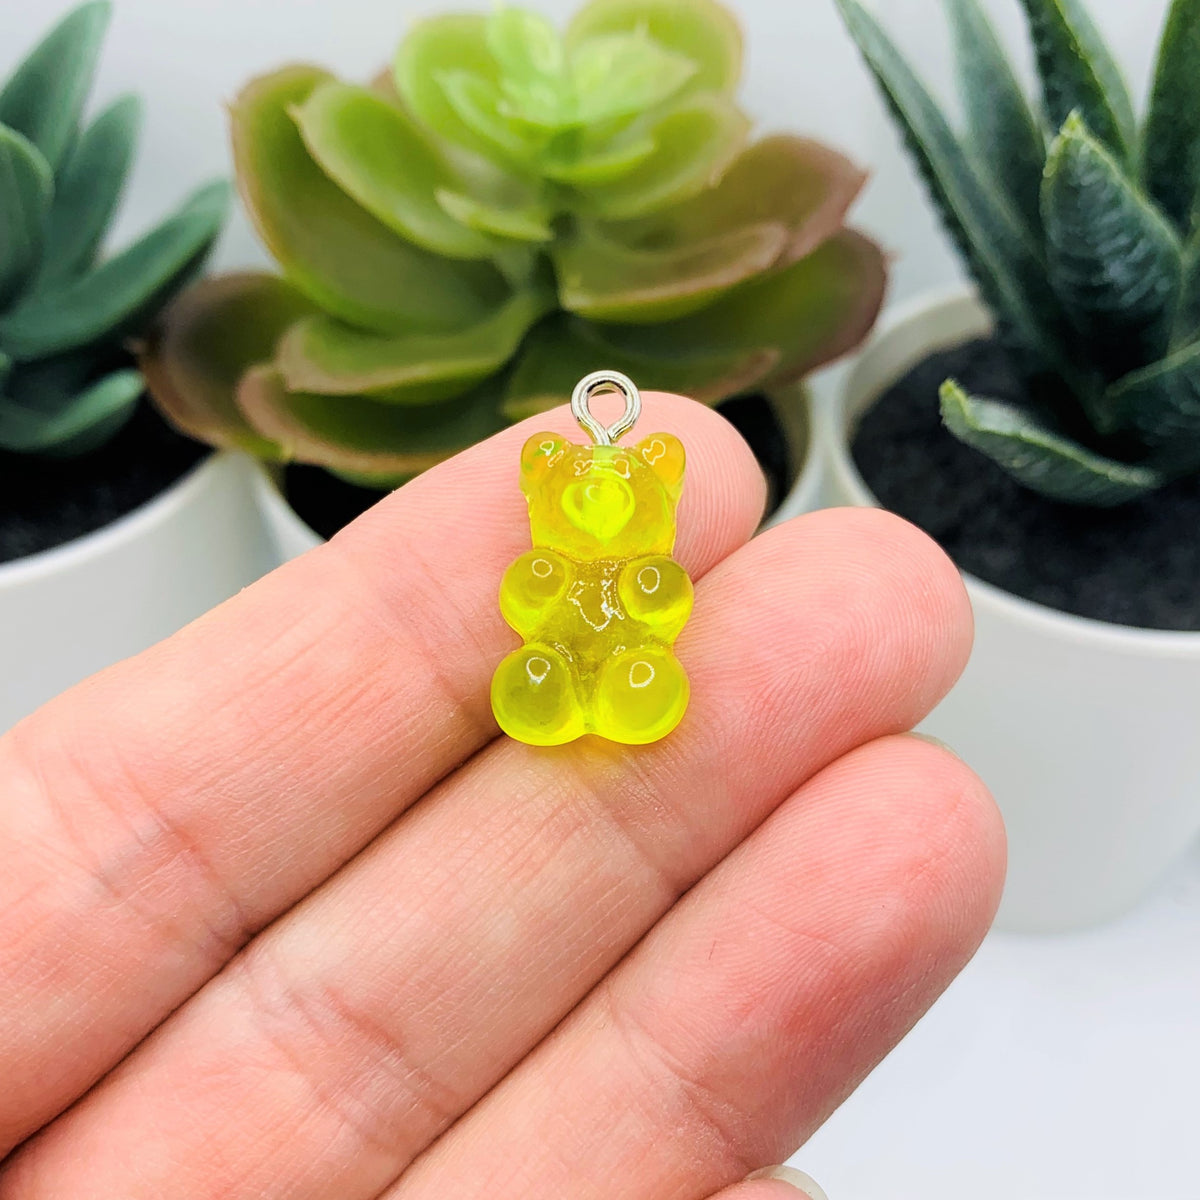 4, 20 or 50 Pieces: Mix Color Gummy Bear Resin 3D Charms with eye